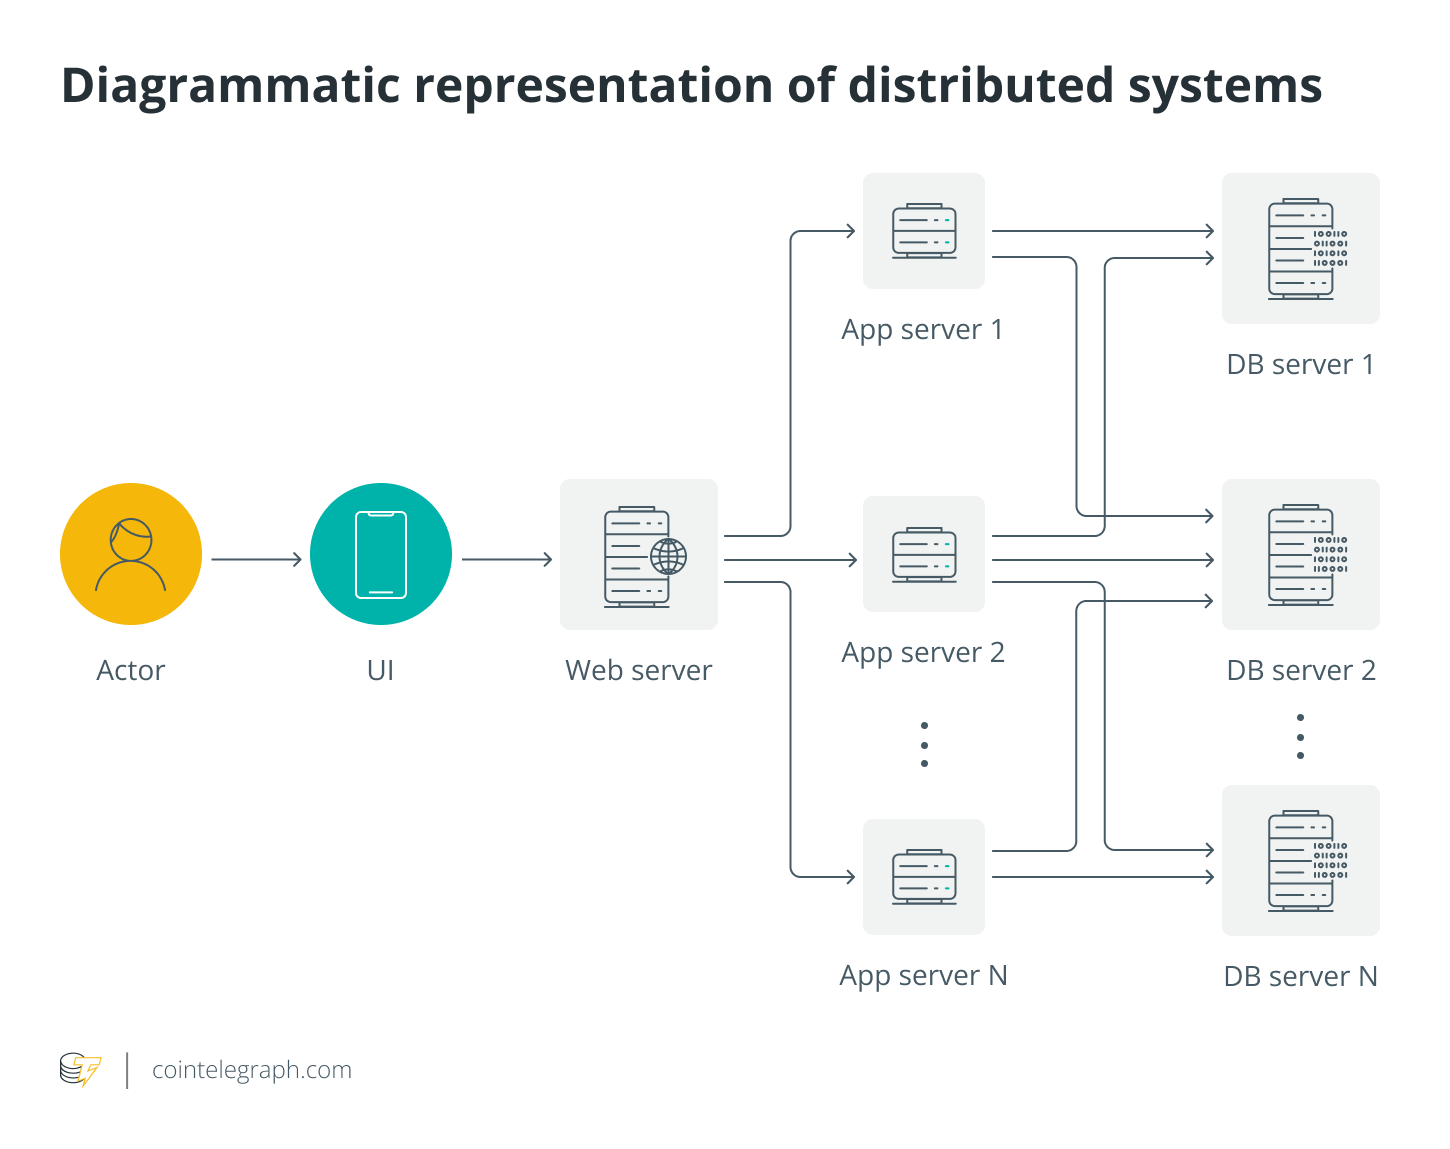 Diagrammatic representation of distributed systems